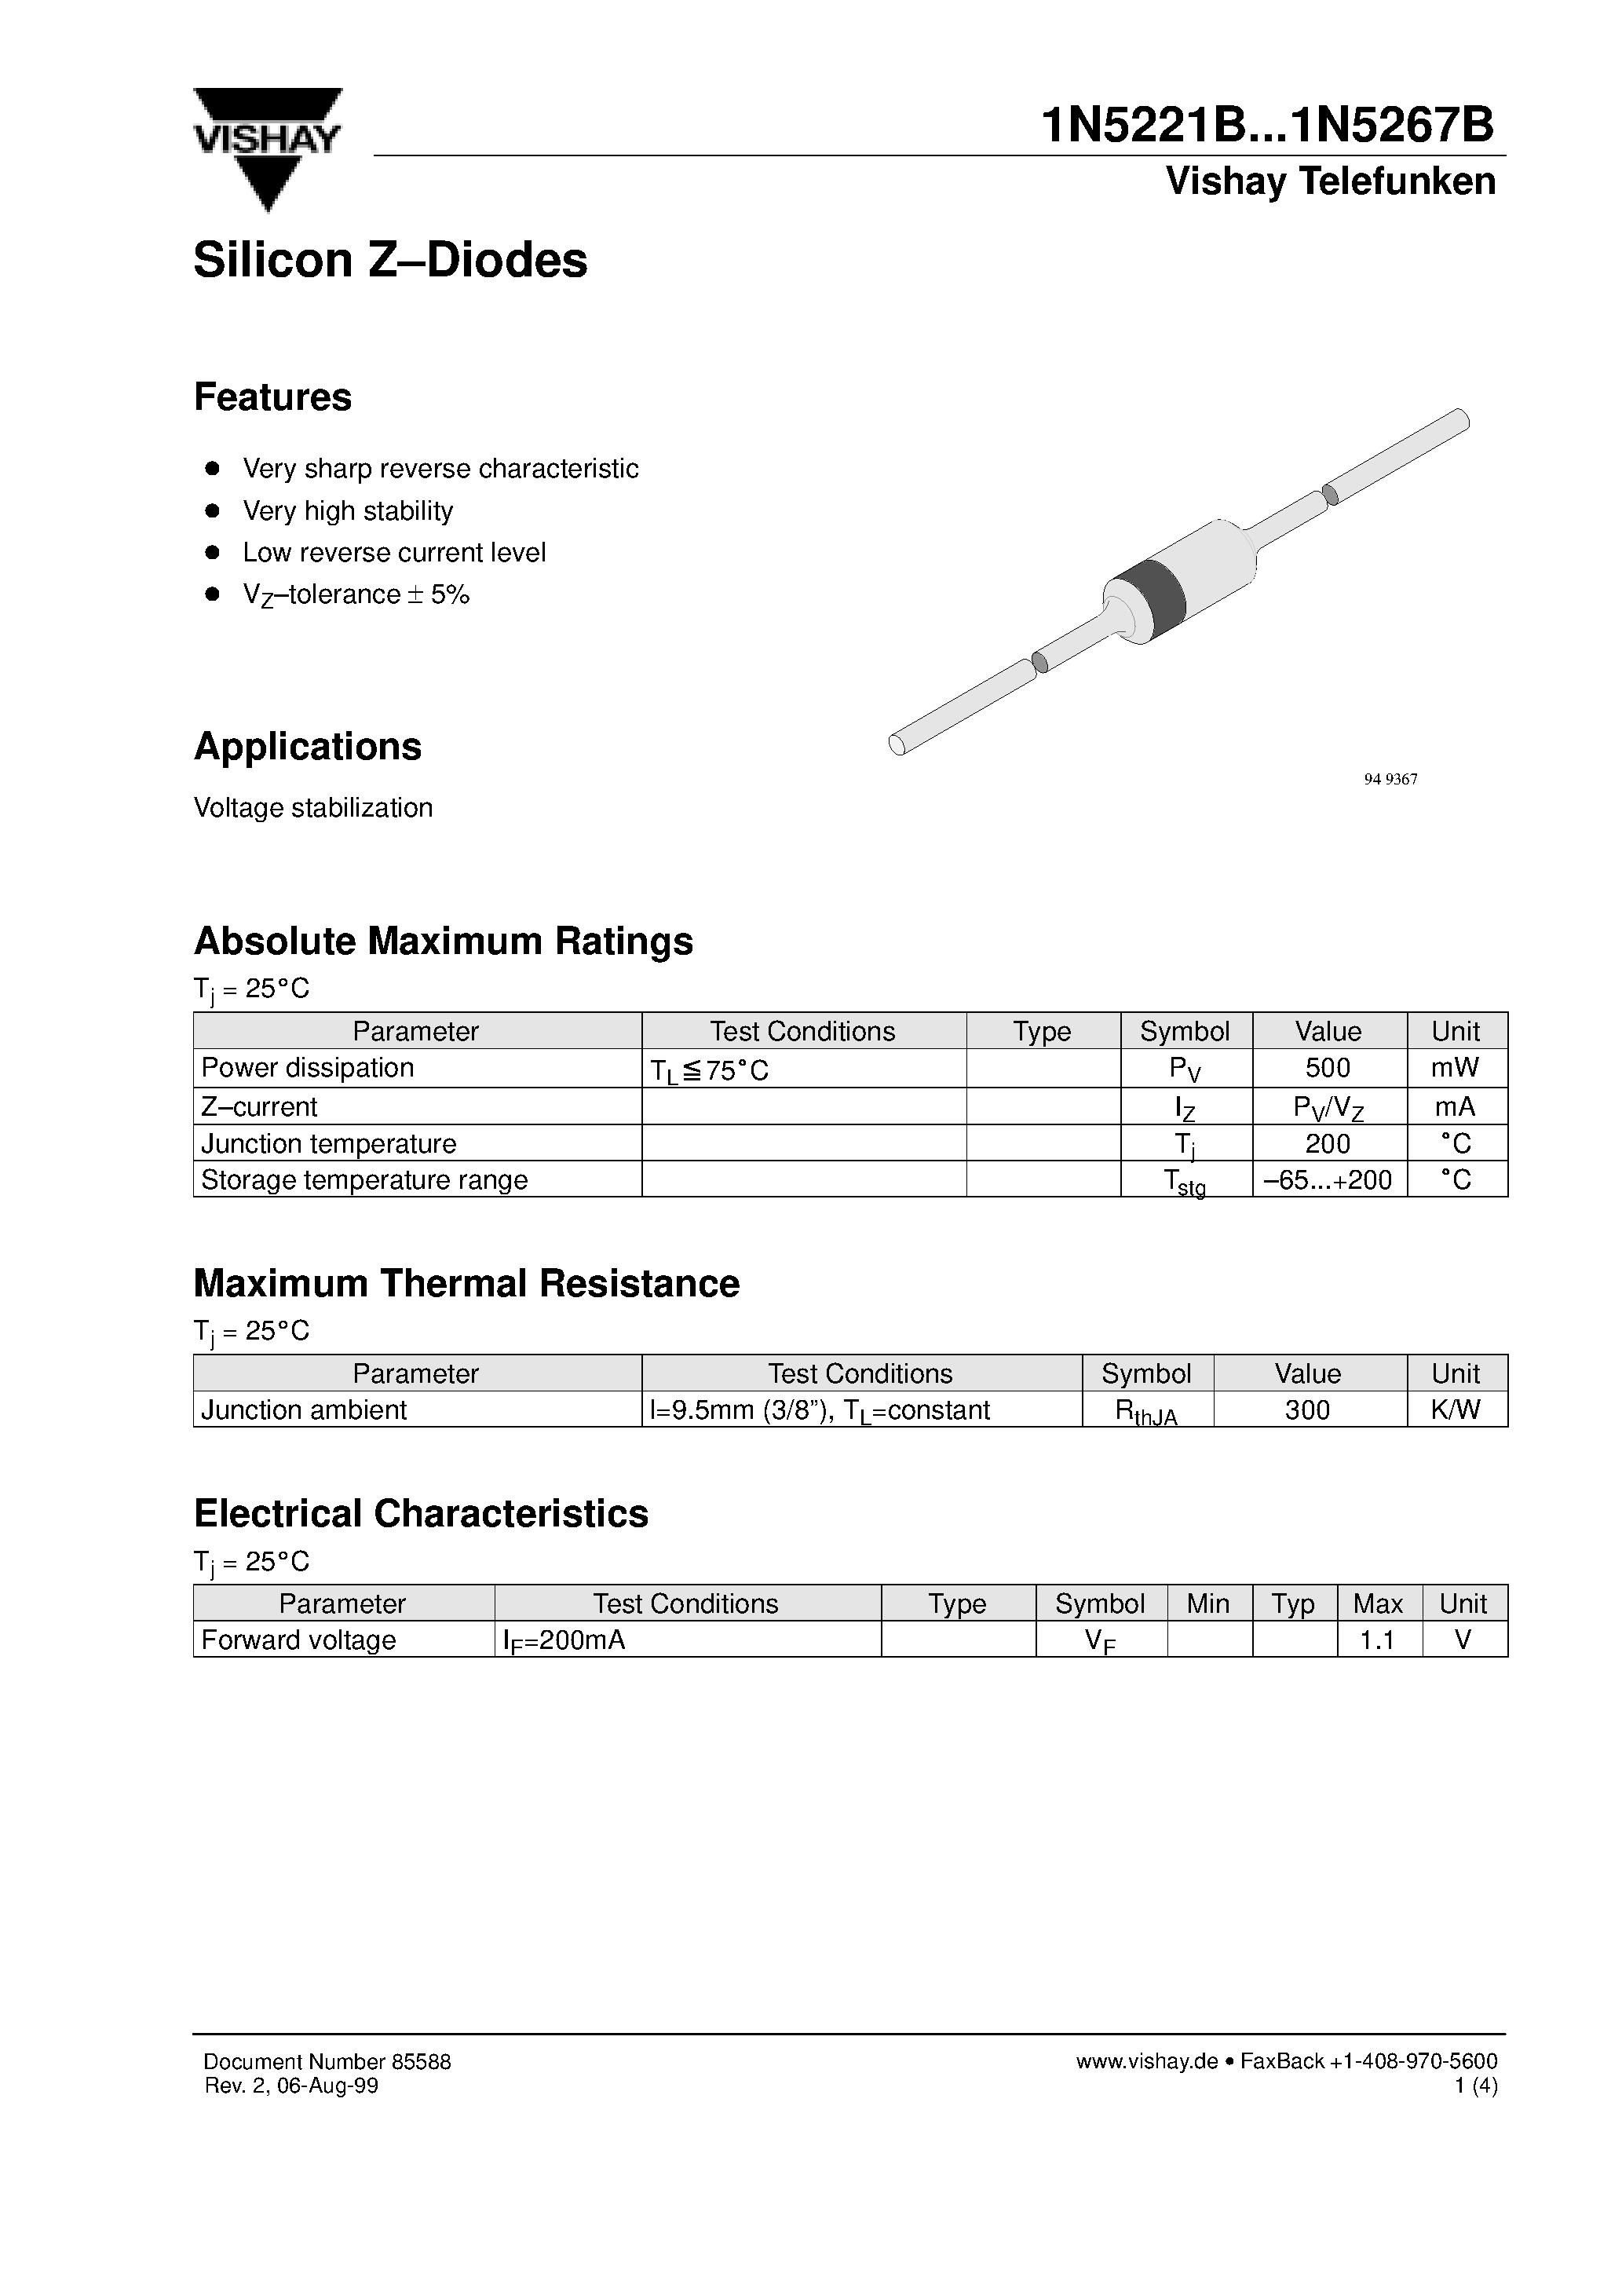 Datasheet 1N5267B - Silicon Z-Diodes page 1